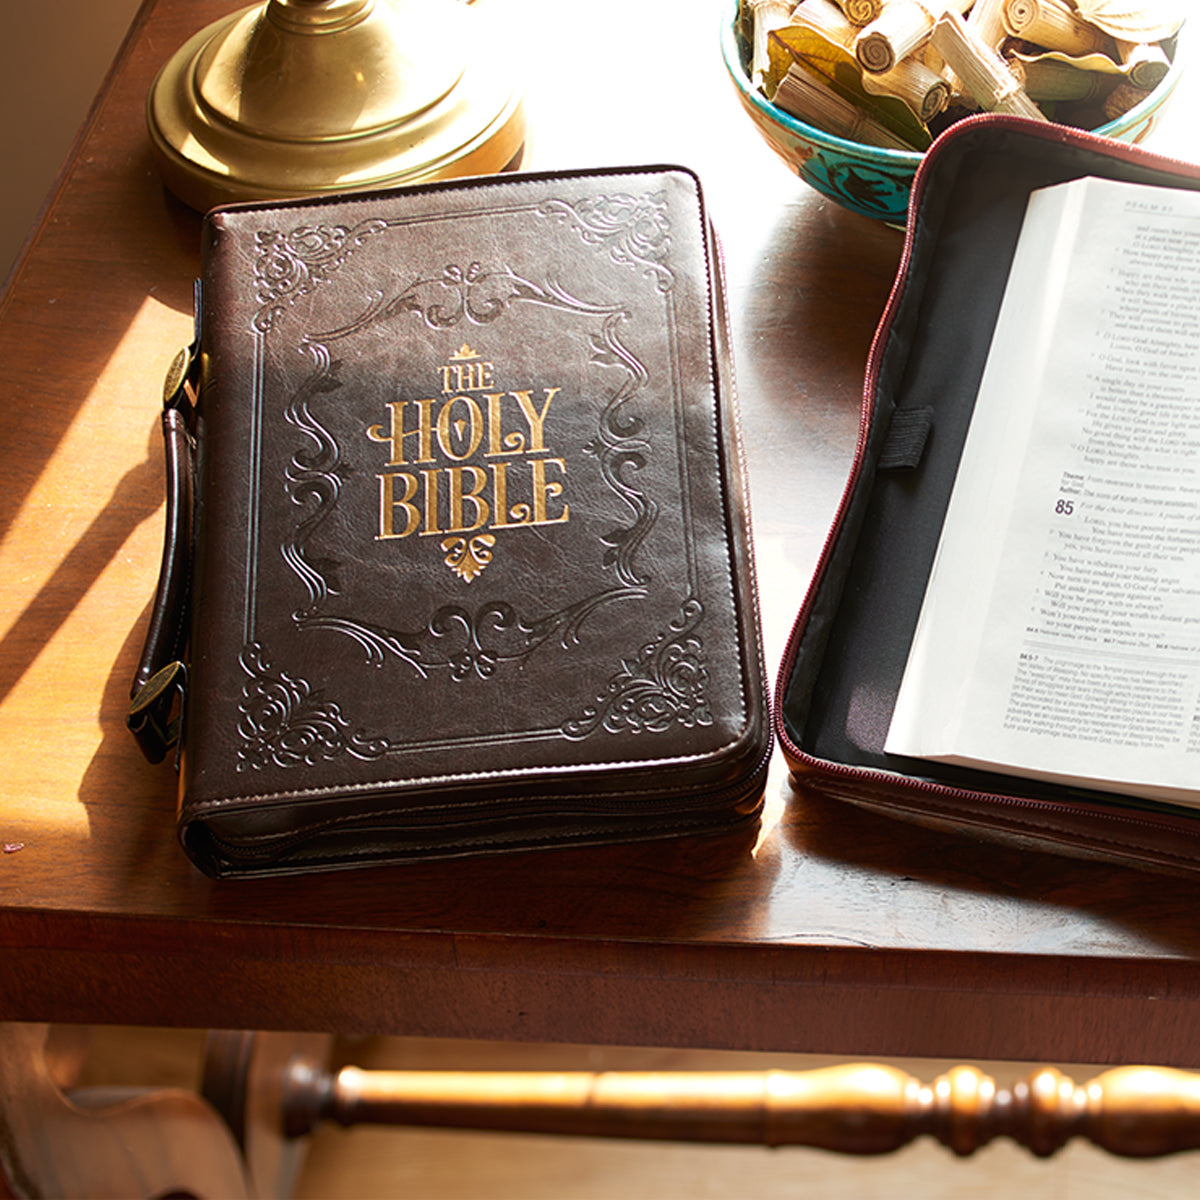 Image of The Holy Bible Dark Brown Faux Leather Classic Bible Cover other